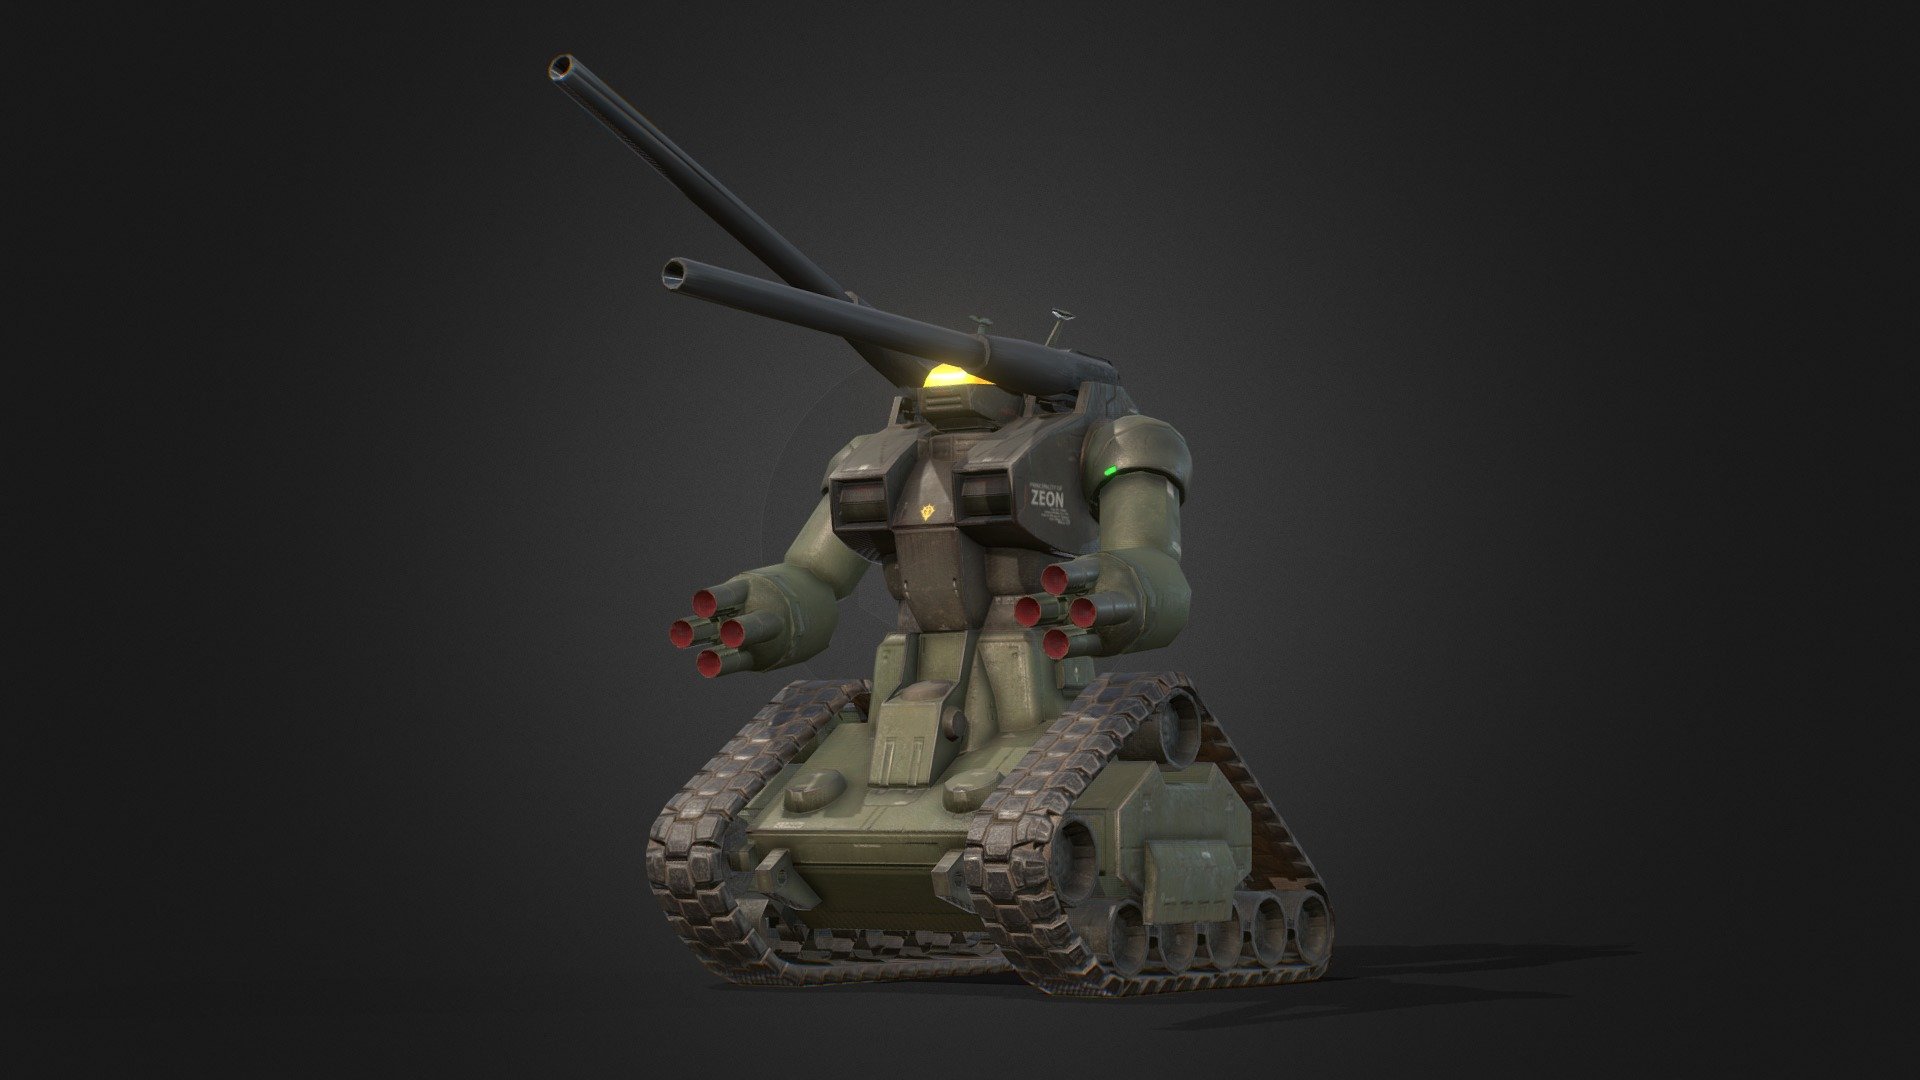 This model was made for One Year War mod of Hearts of Iron IV.

Our Mod Steam Home Page

https://steamcommunity.com/sharedfiles/filedetails/?id=2064985570 - RX-75 Guntank - zeon - 3D model by One Year War Mod (@hoi4oneyearwar) 3d model